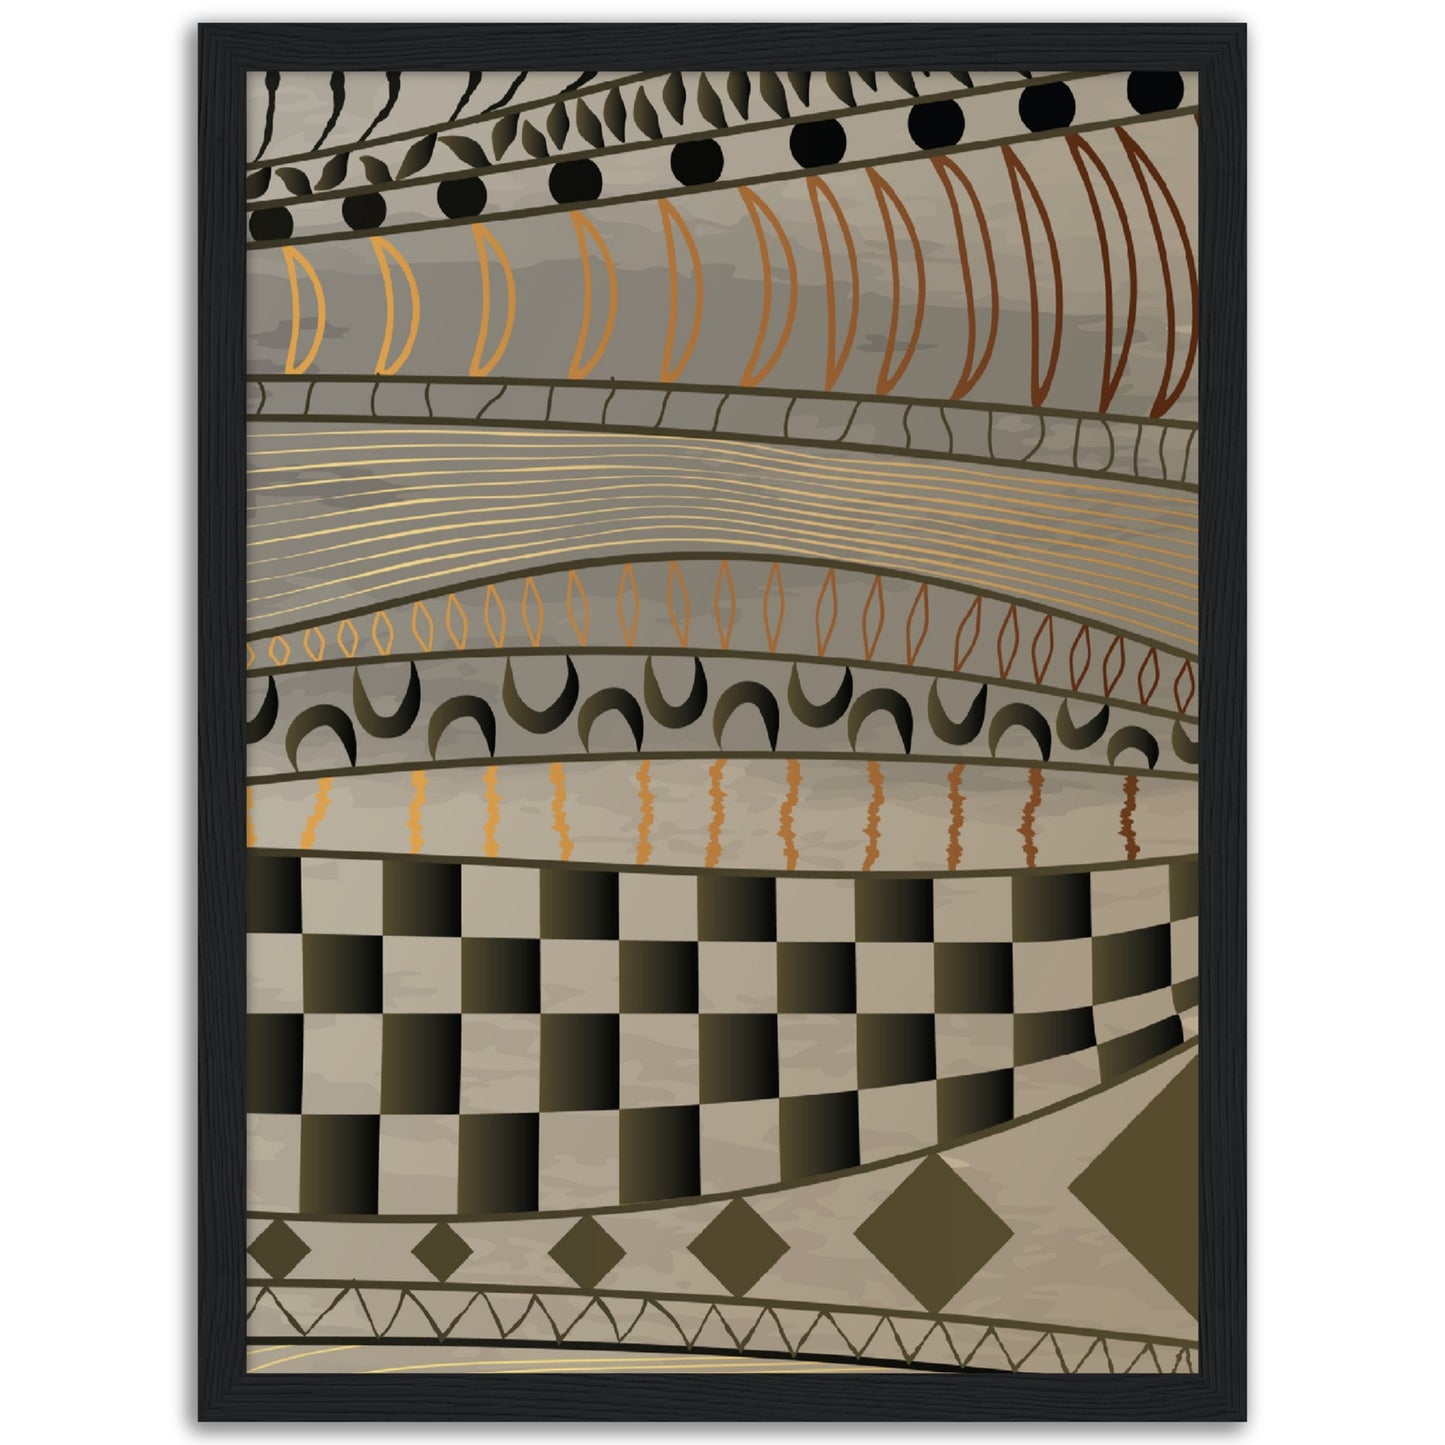 Abstract Tribal Landscape Print, No3